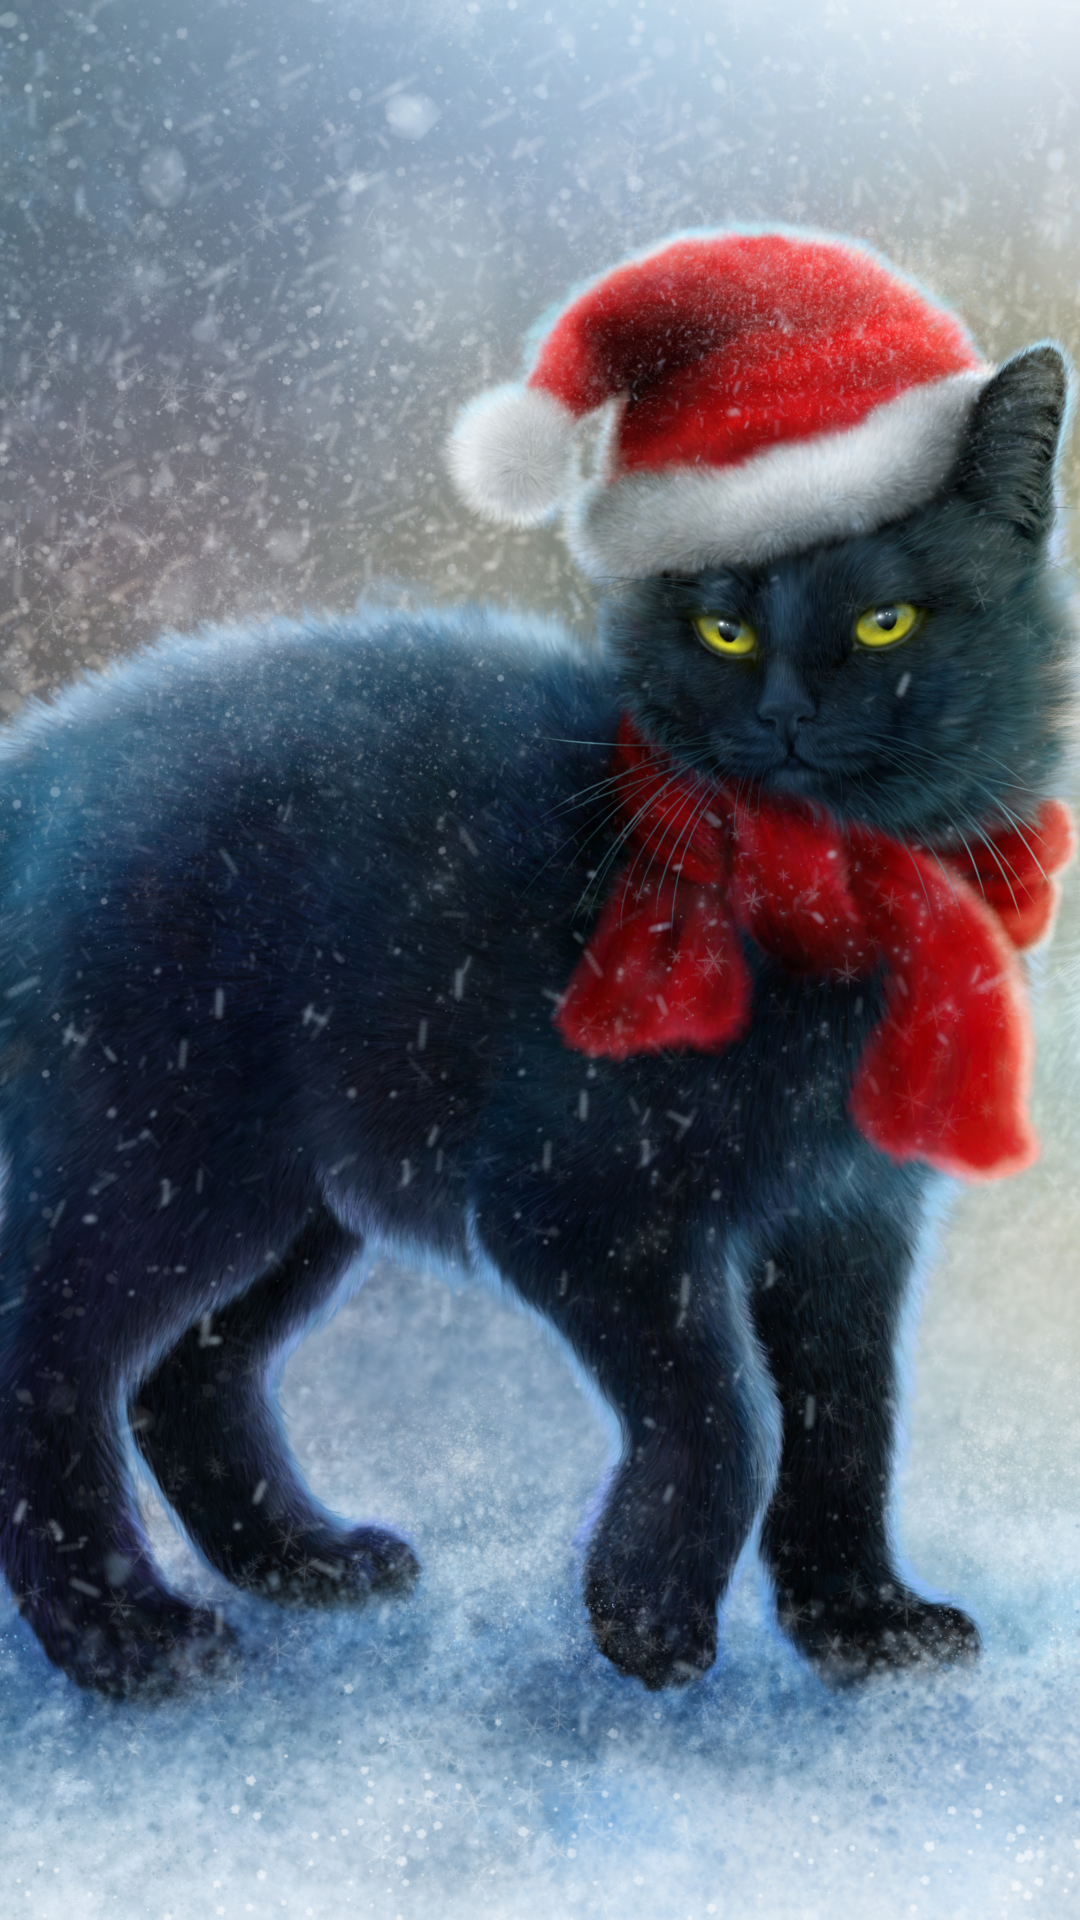 Christmas Cats Wallpaper For Iphone - HD Wallpaper 